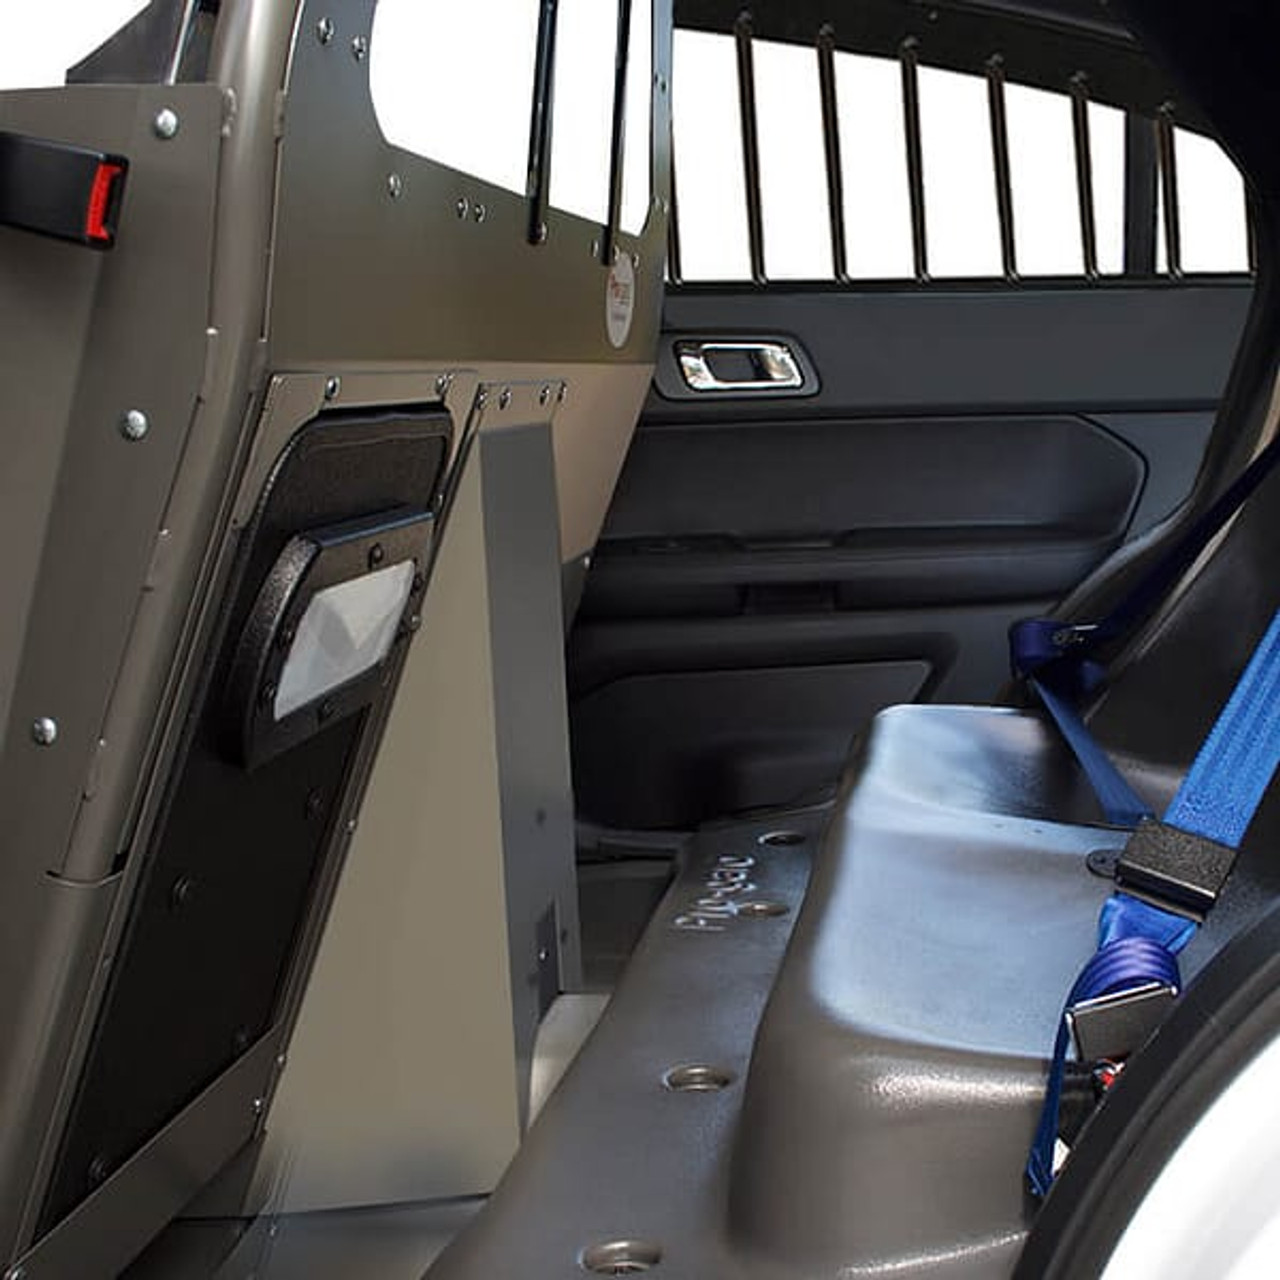 Pro-Gard PVS1826, VIPER Shield Enhanced Prisoner Transport System, Dual Compartments, Pro-Cell Full Partition, Outboard Seat Belts, VIPER Shield, For 13-22 Ford Interceptor Utility, 15-22 Chevrolet Tahoe PPV, 11-22 Dodge Charger, 18-22 Durango